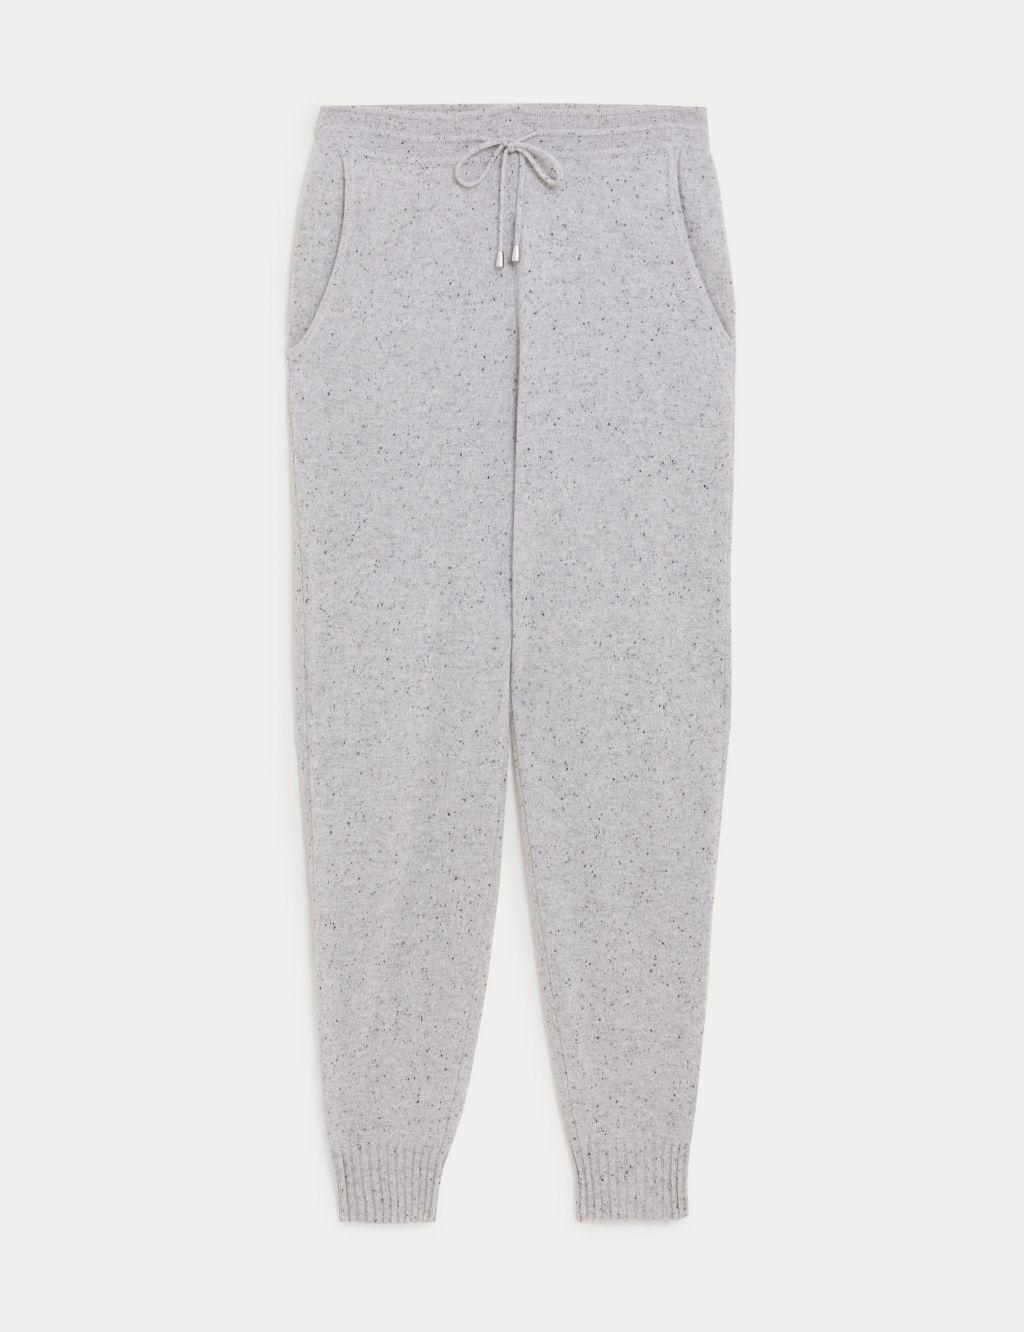 Pure Cashmere Textured Joggers image 2